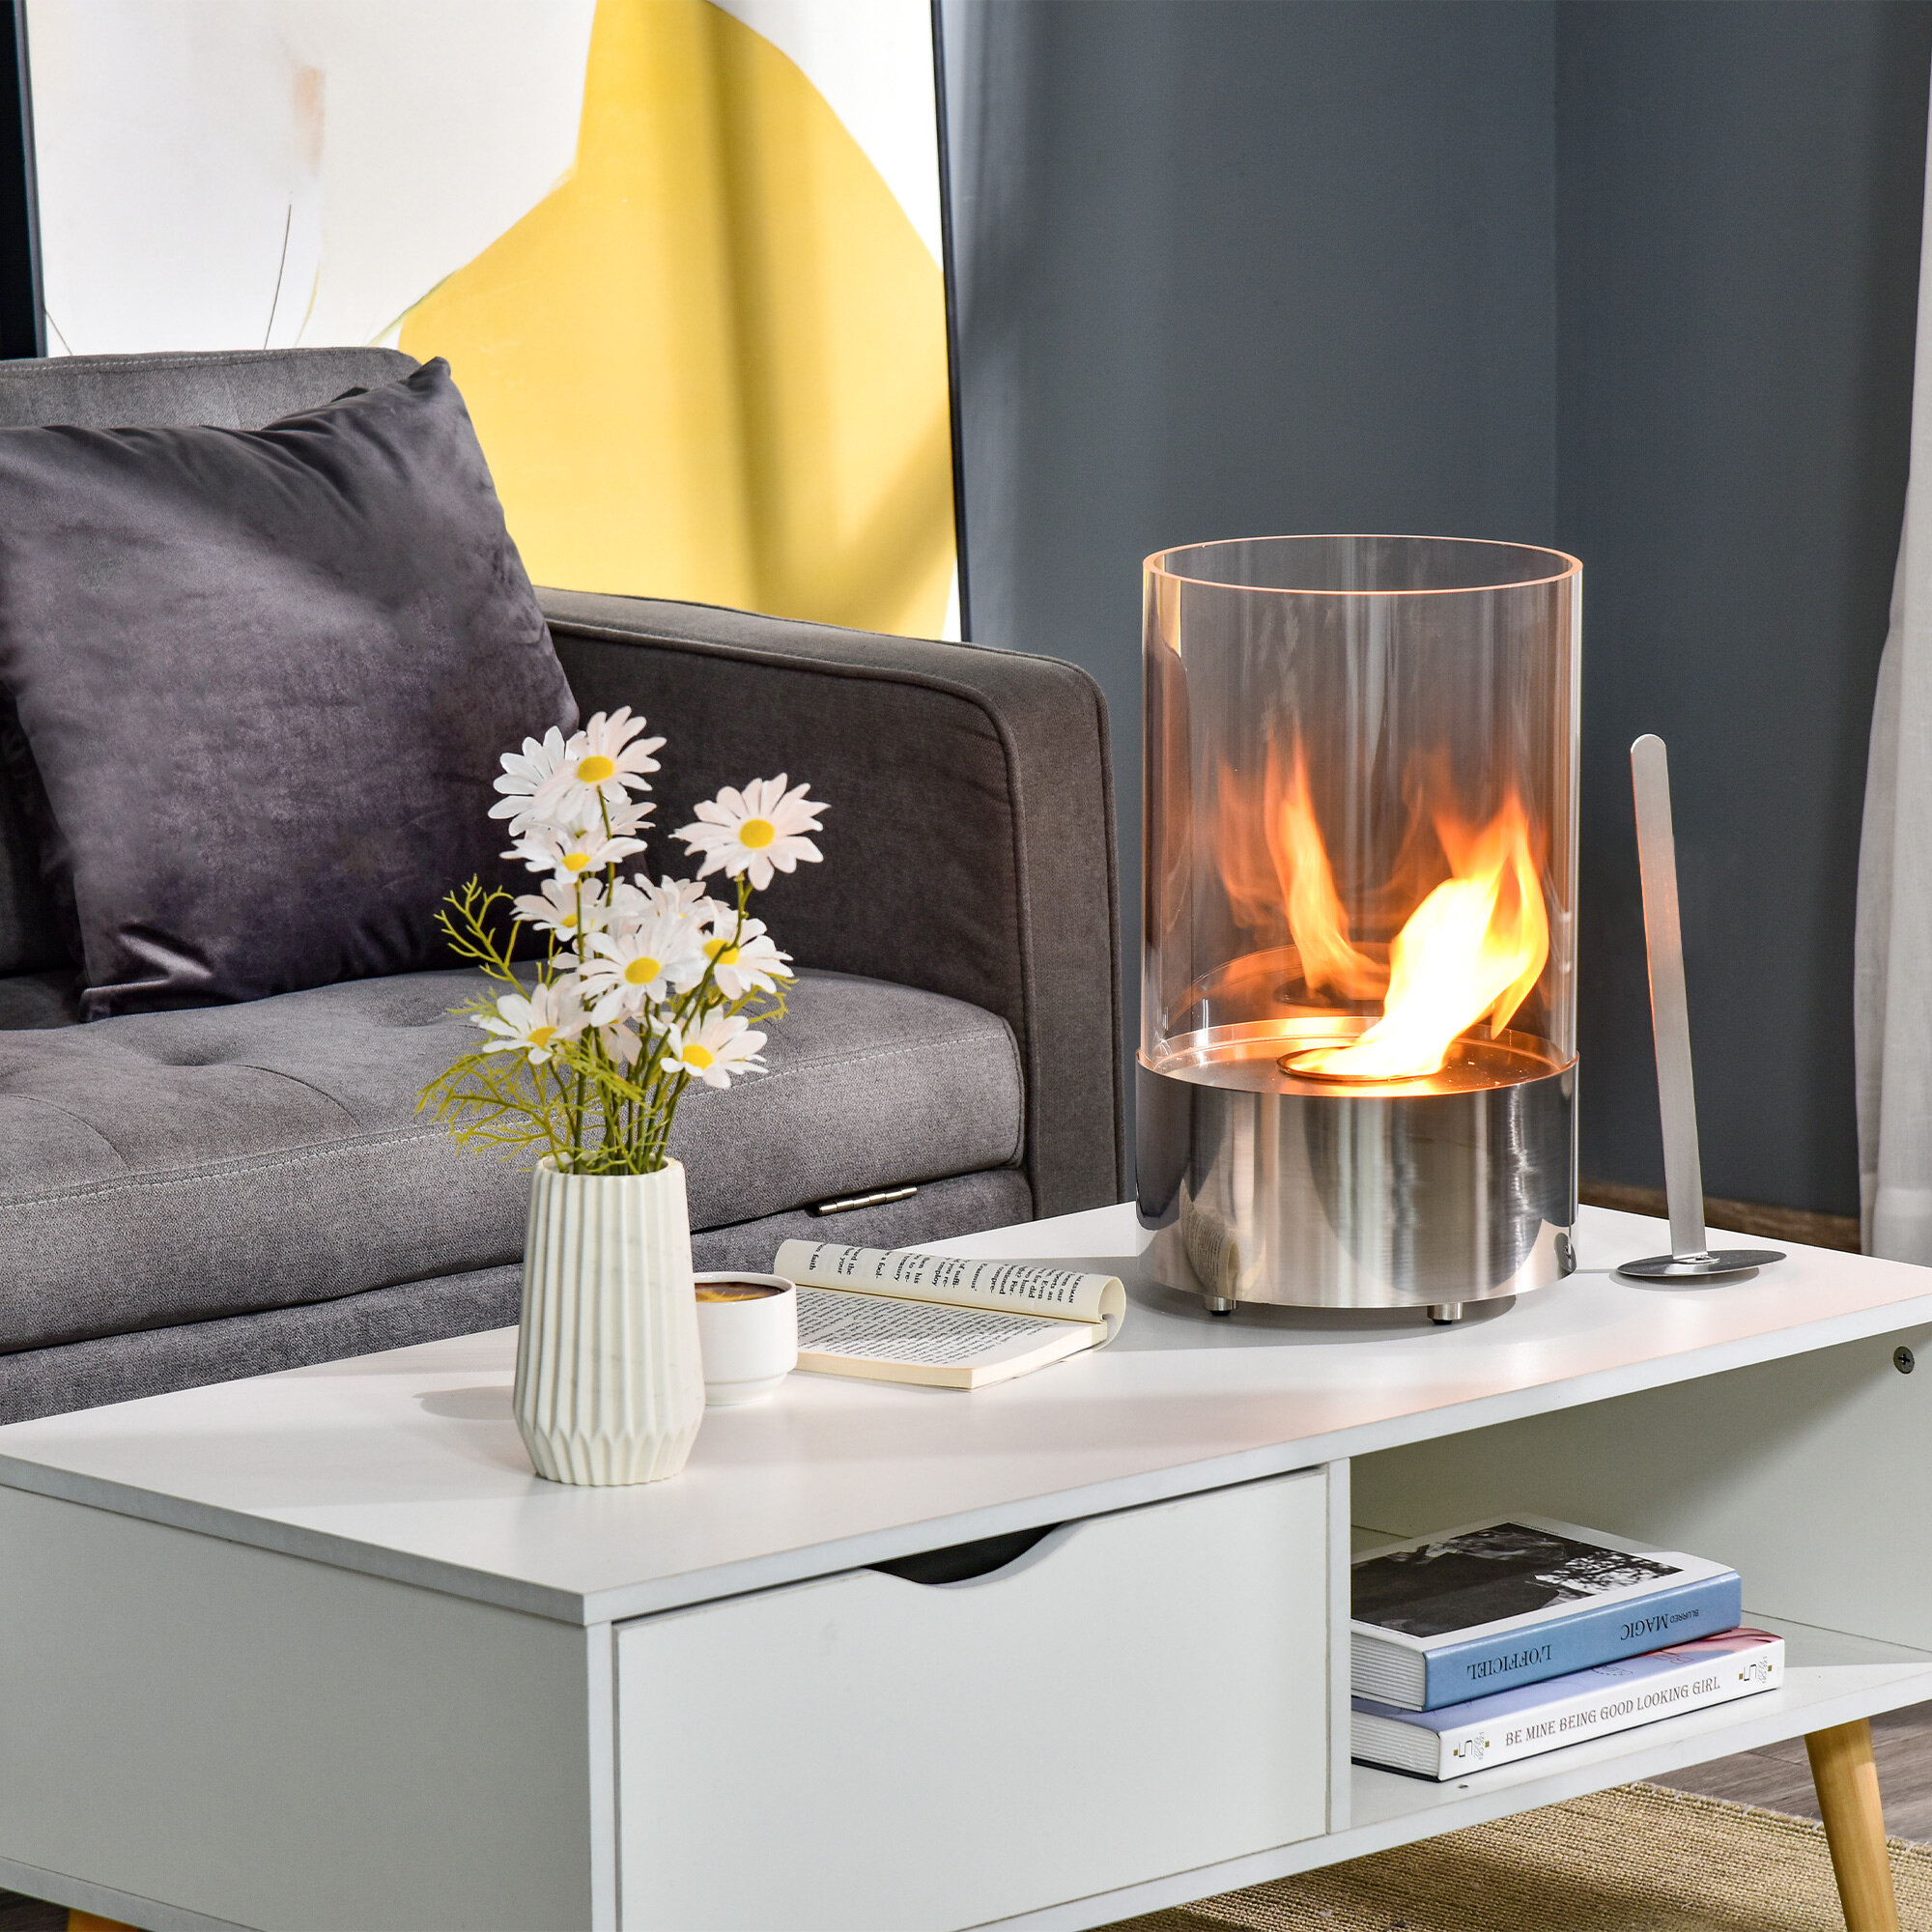 TerraFlame 3.5-in x 3.5-in Bio-ethanol Fireplace in the Gel & Ethanol  Fireplaces department at